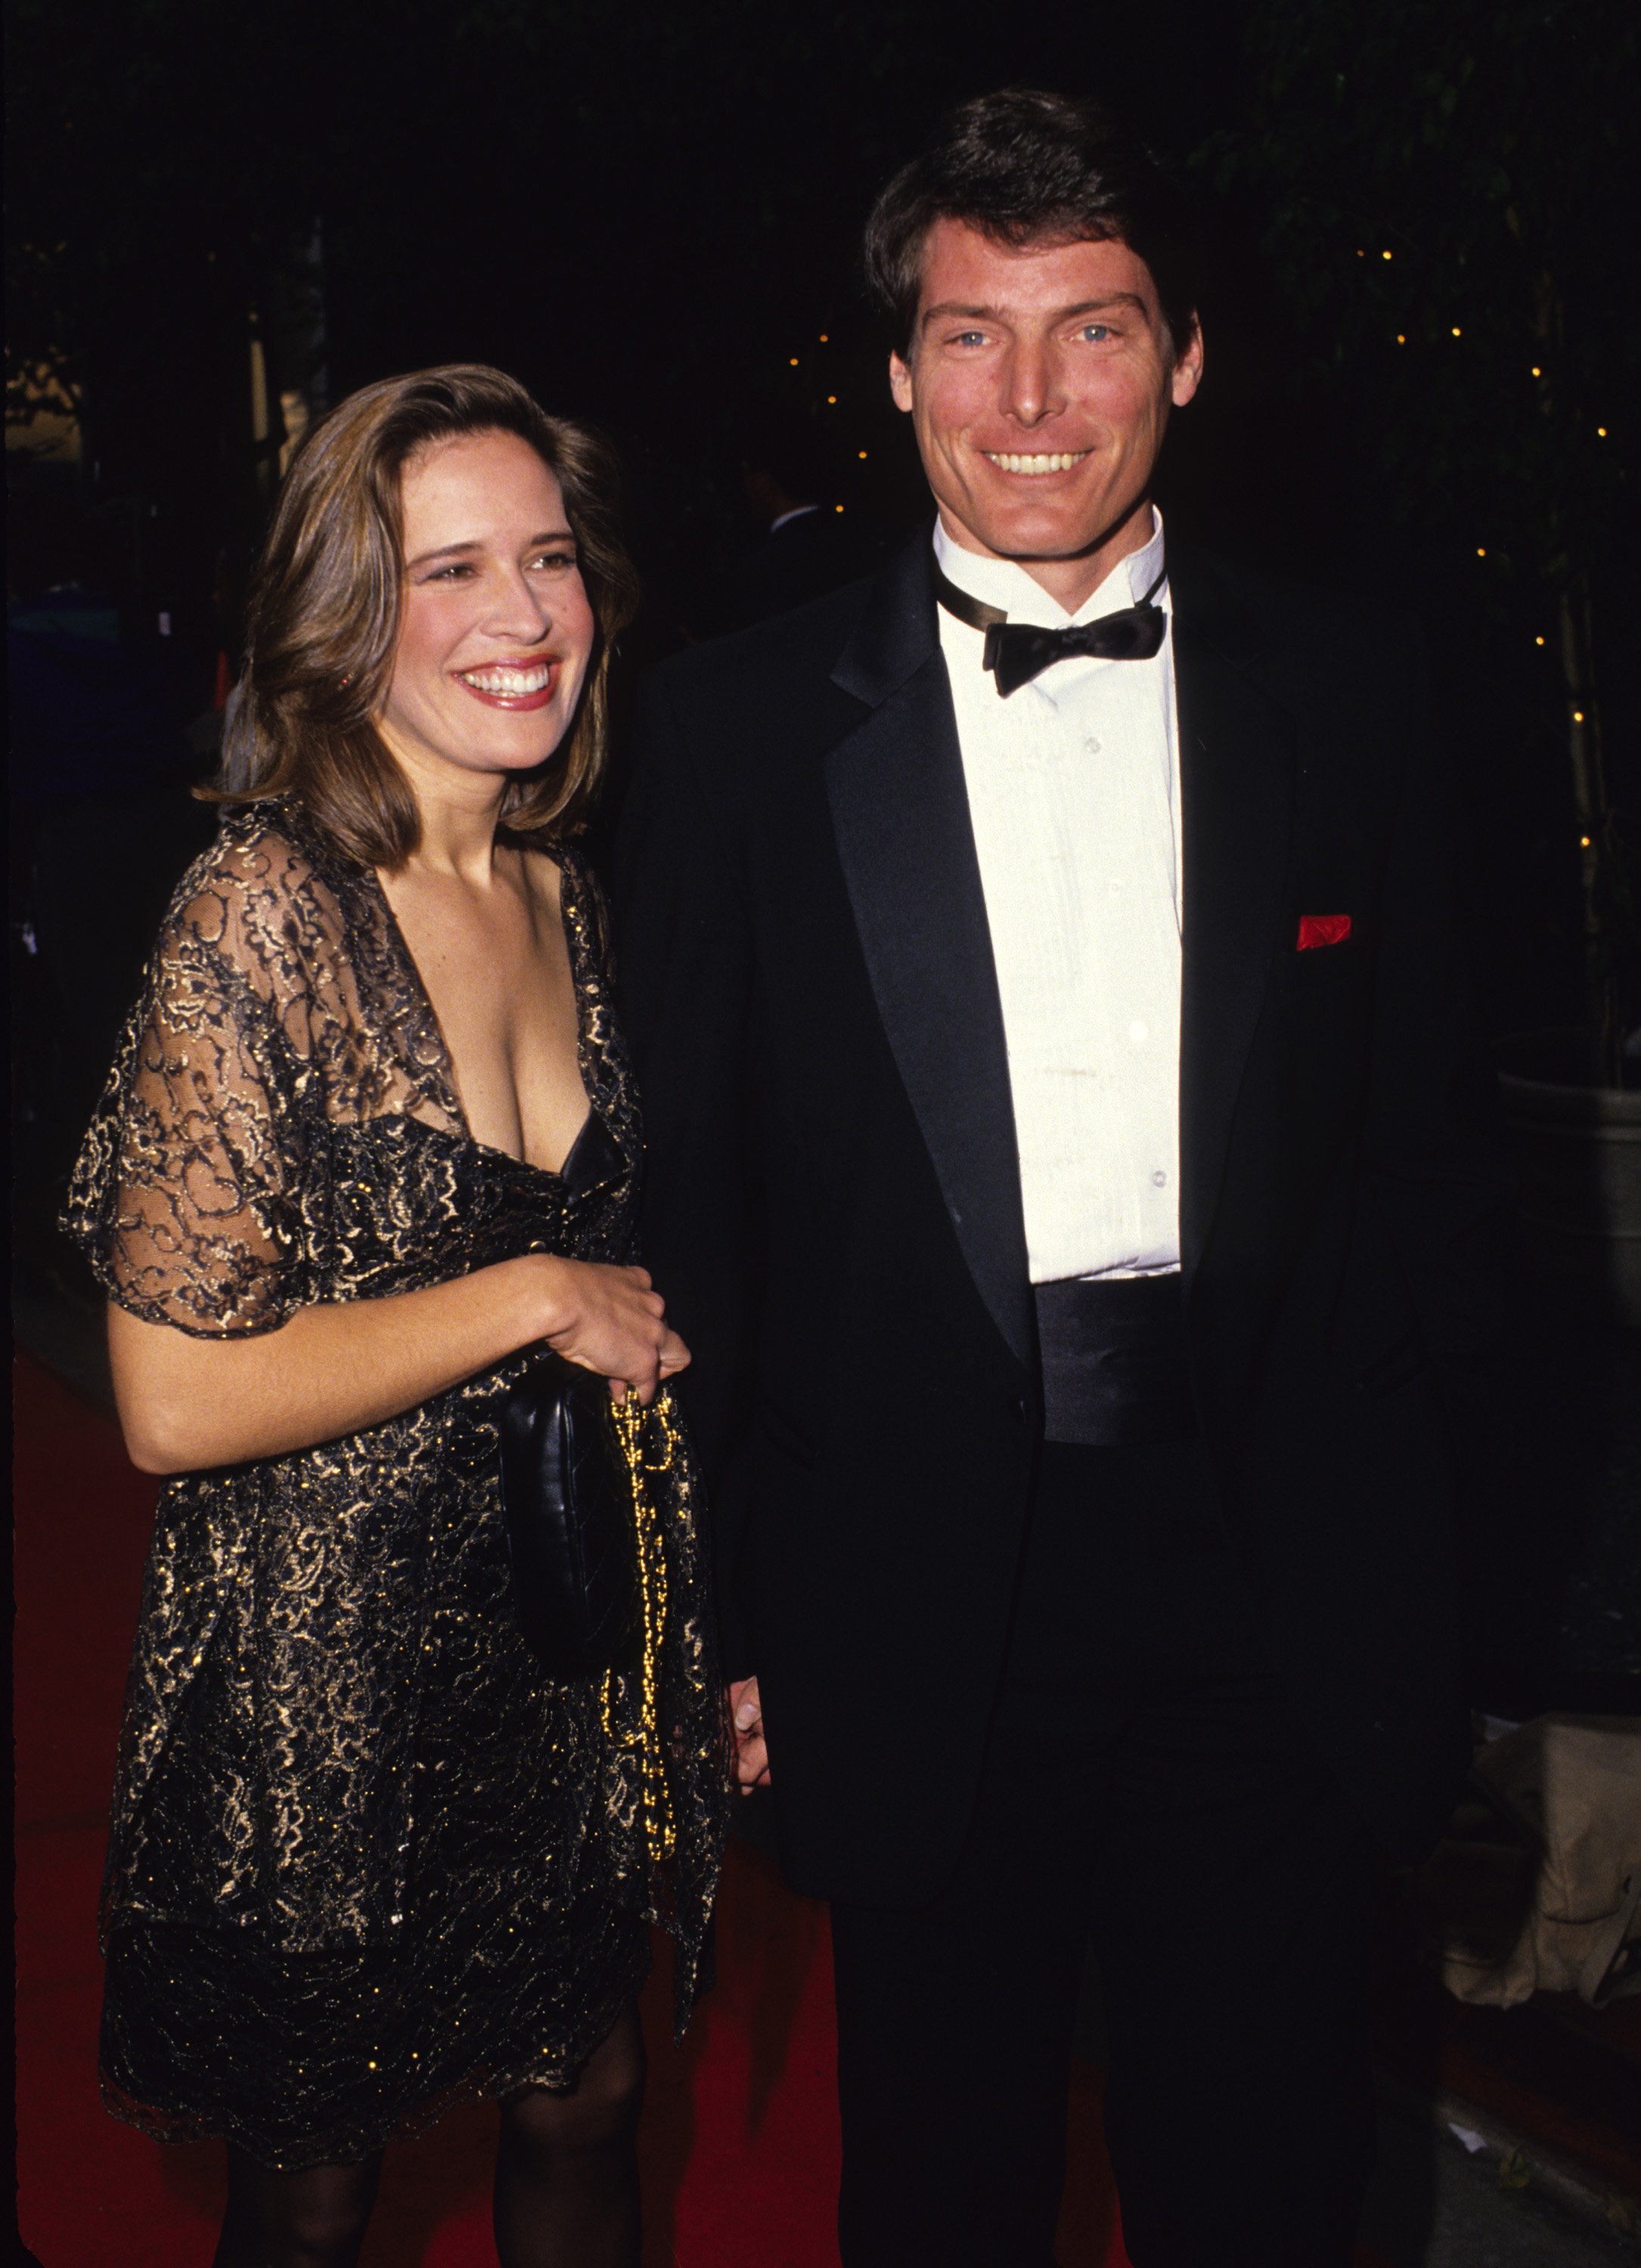 Christopher Reeve and wife Dana during Christopher Reeve File Photos in Los Angeles, California, United States. | Source: Getty Images